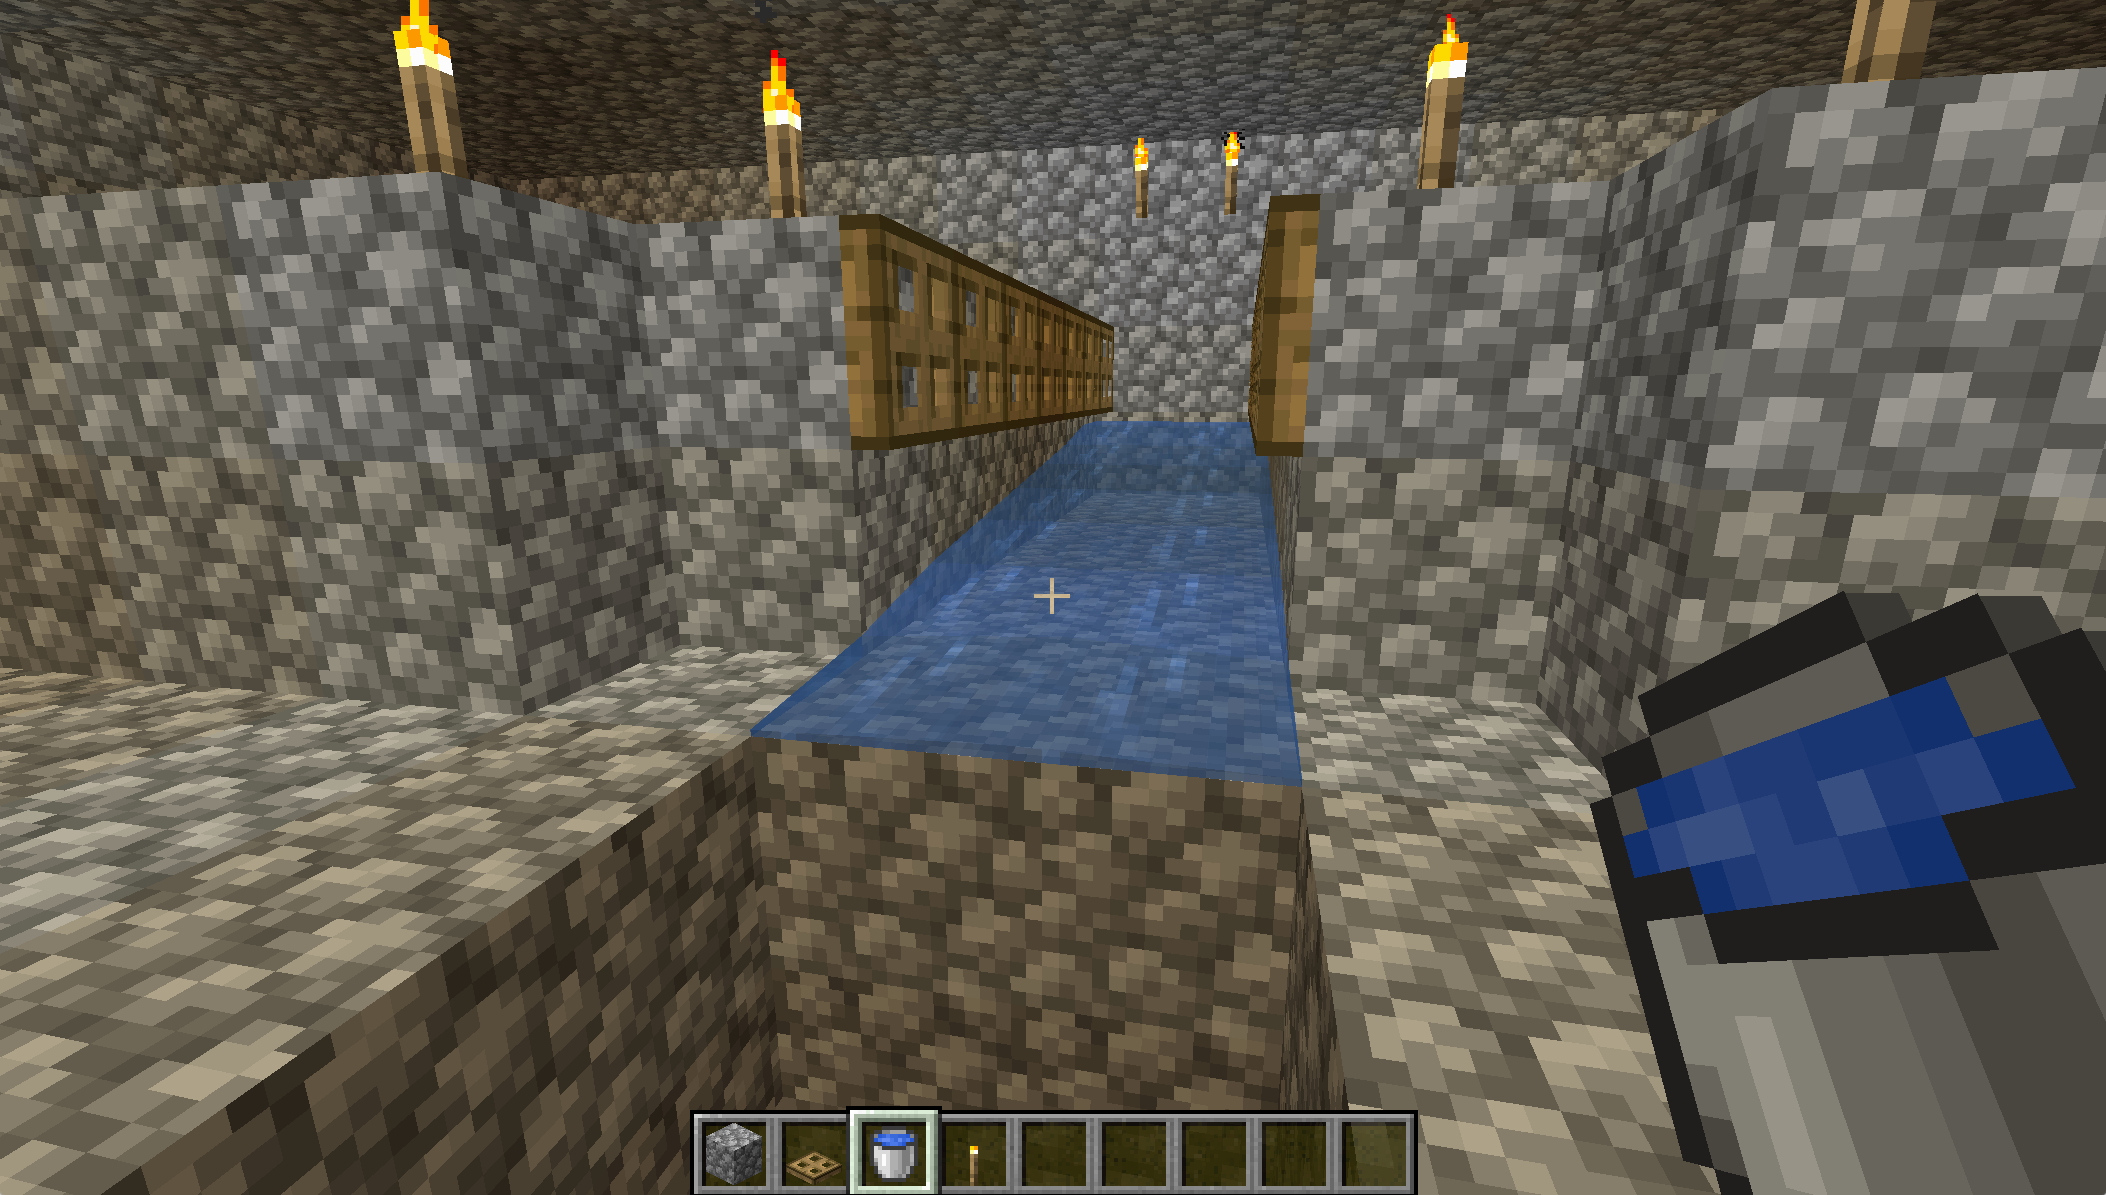 A screenshot from Minecraft, showing water flowing down a bridge.